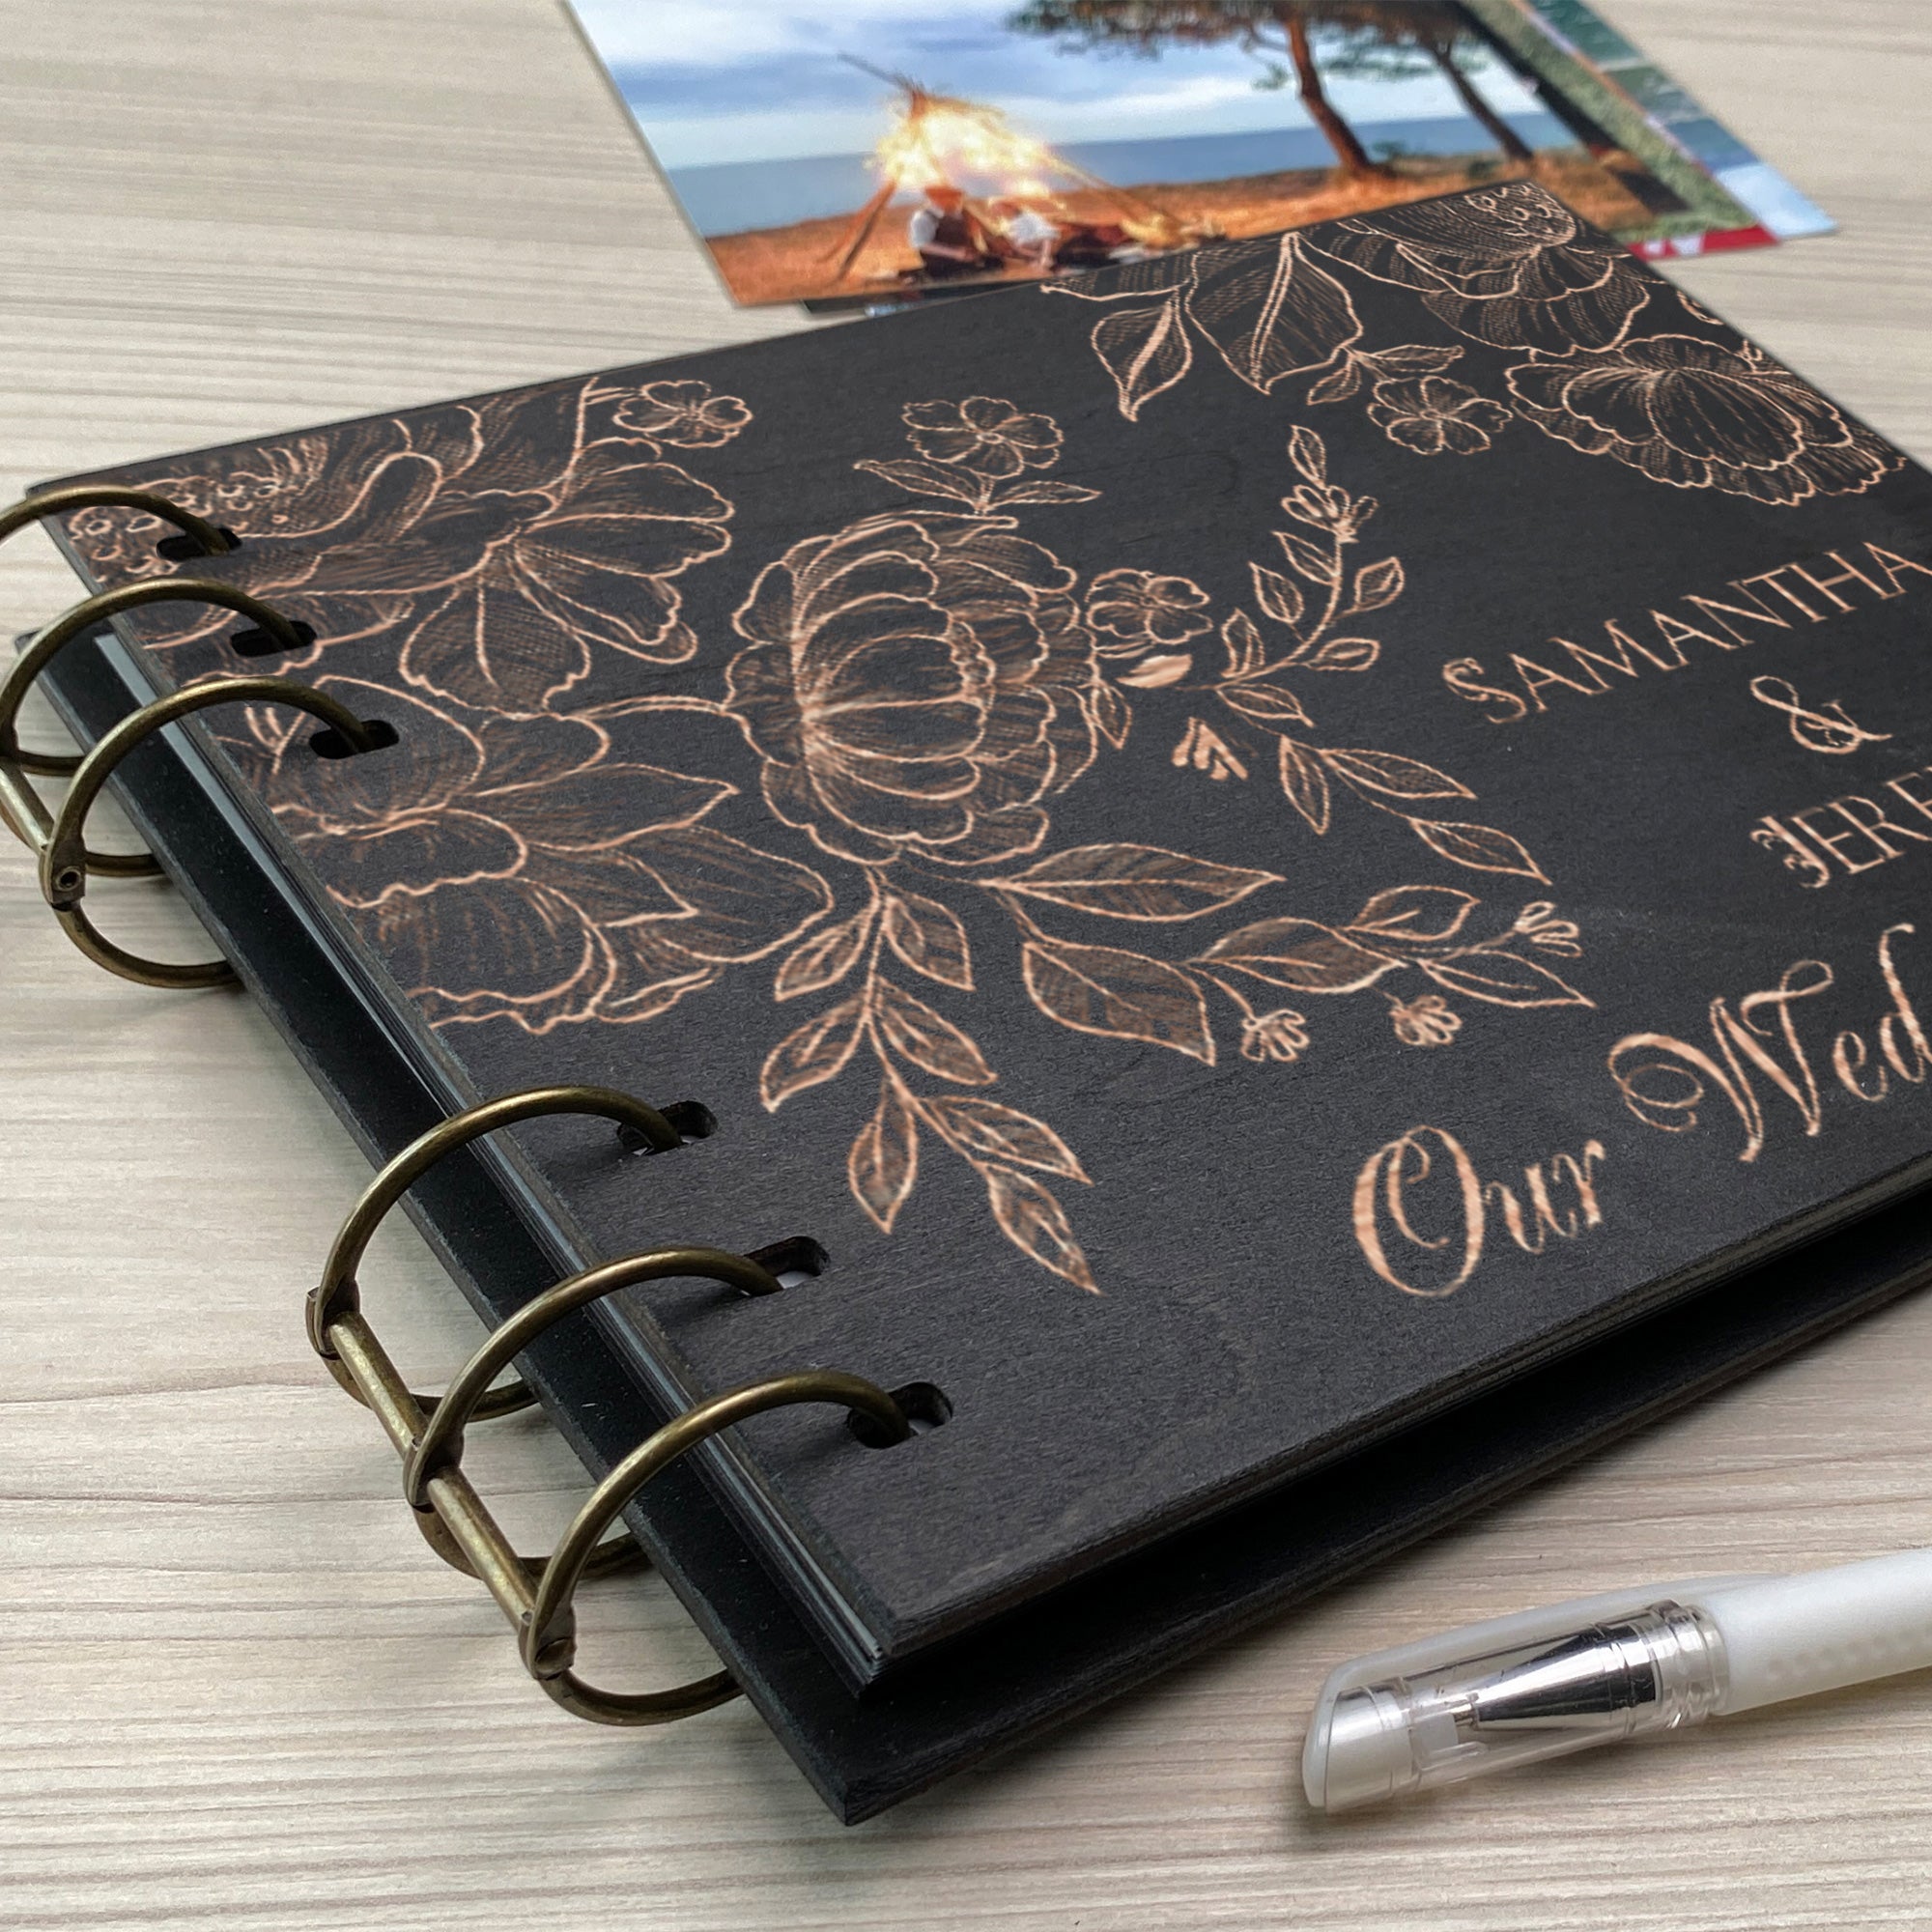 Personalized photo album cover and Peonies engraving